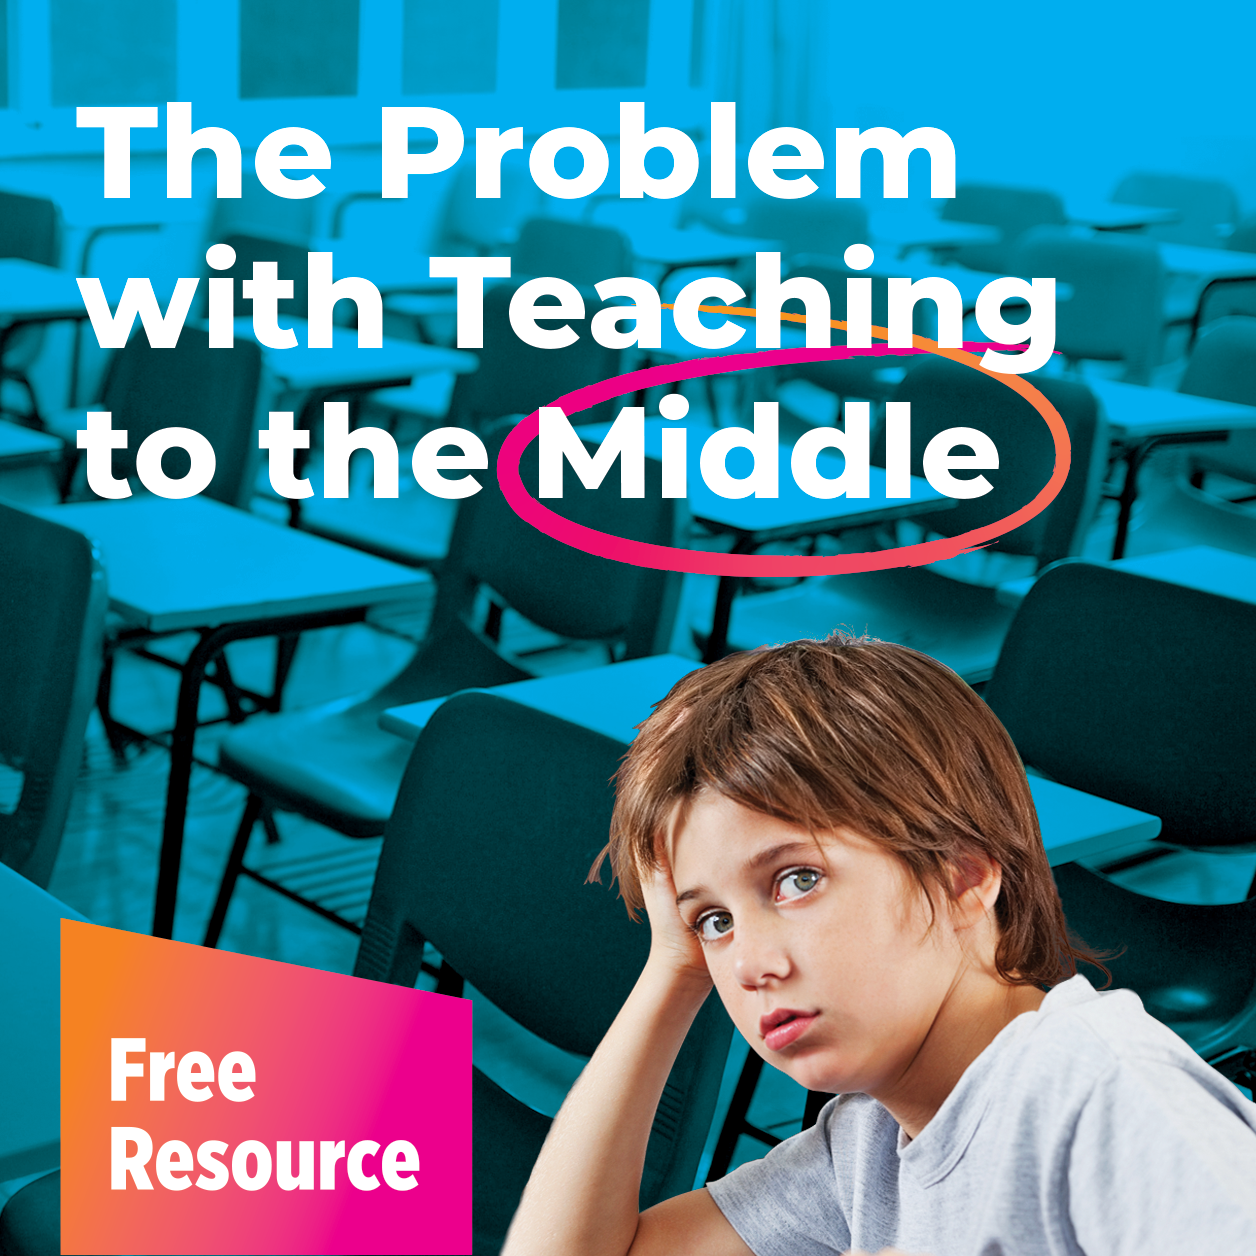 The Problem with Teaching to the Middle